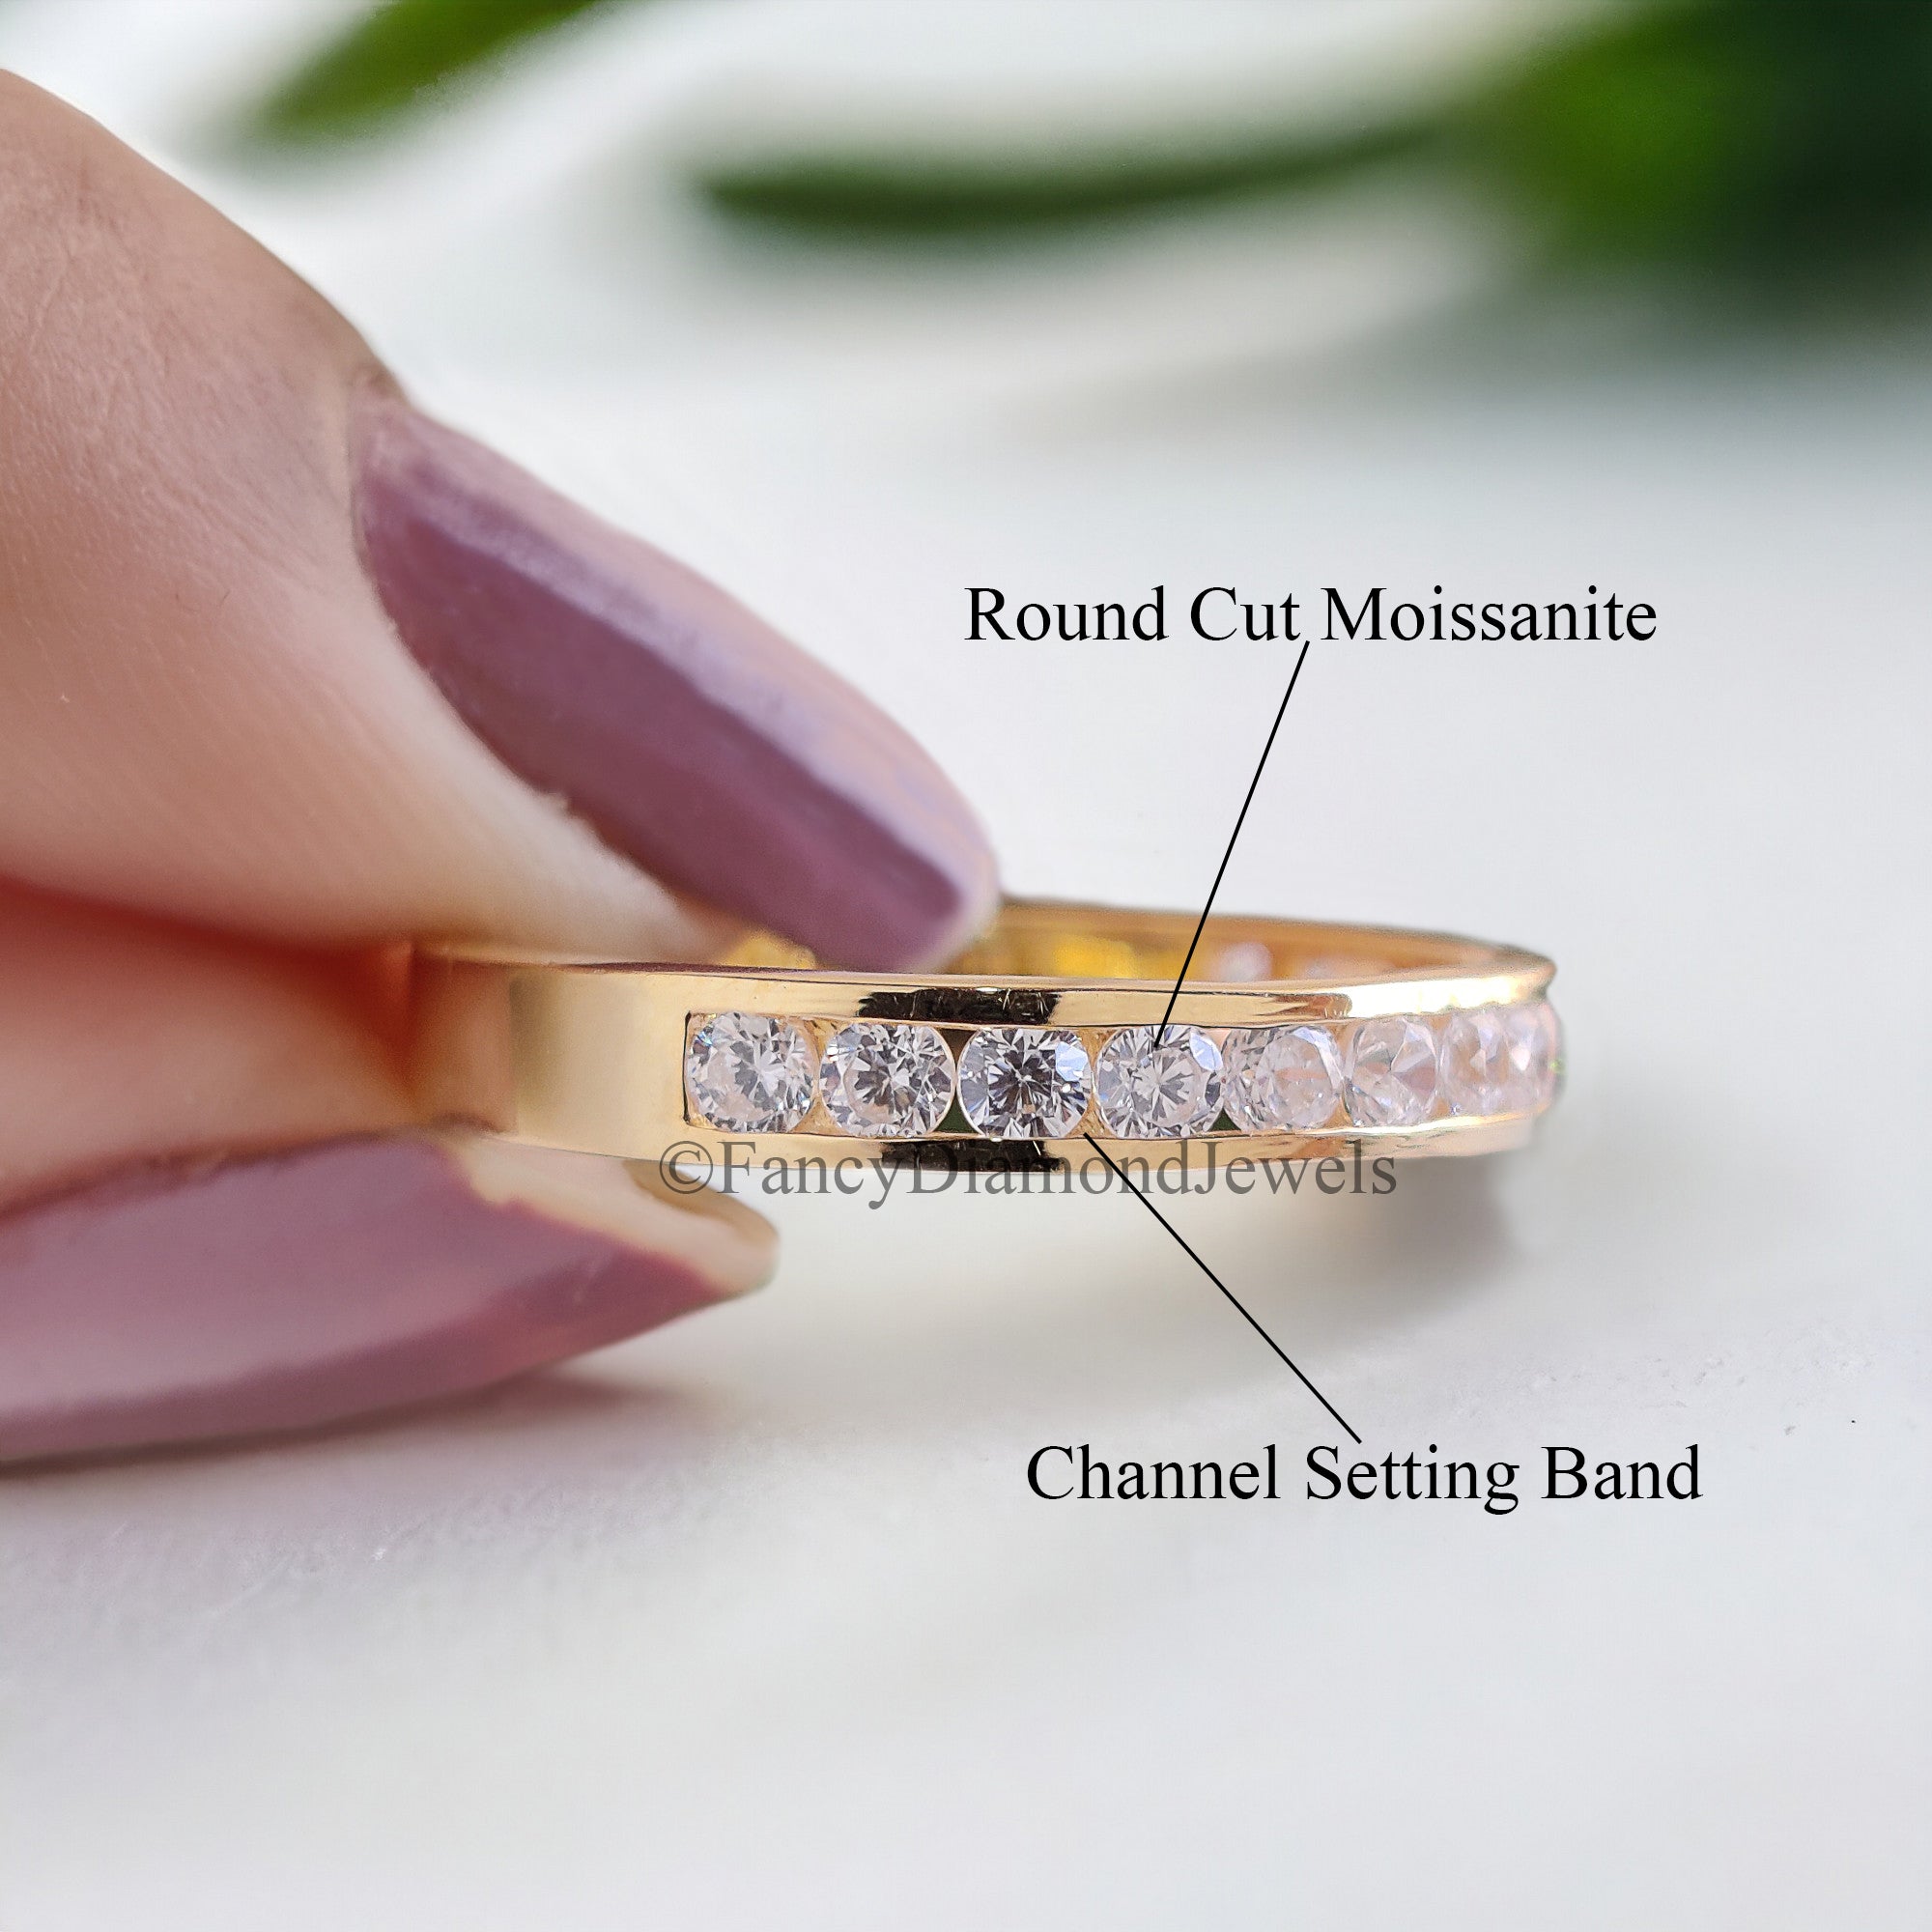 Stunning Round Cut Moissanite Wedding Band In Channel Setting Half Eternity Style Wedding Band Anniversary Gift for Her Bridal Band FD46